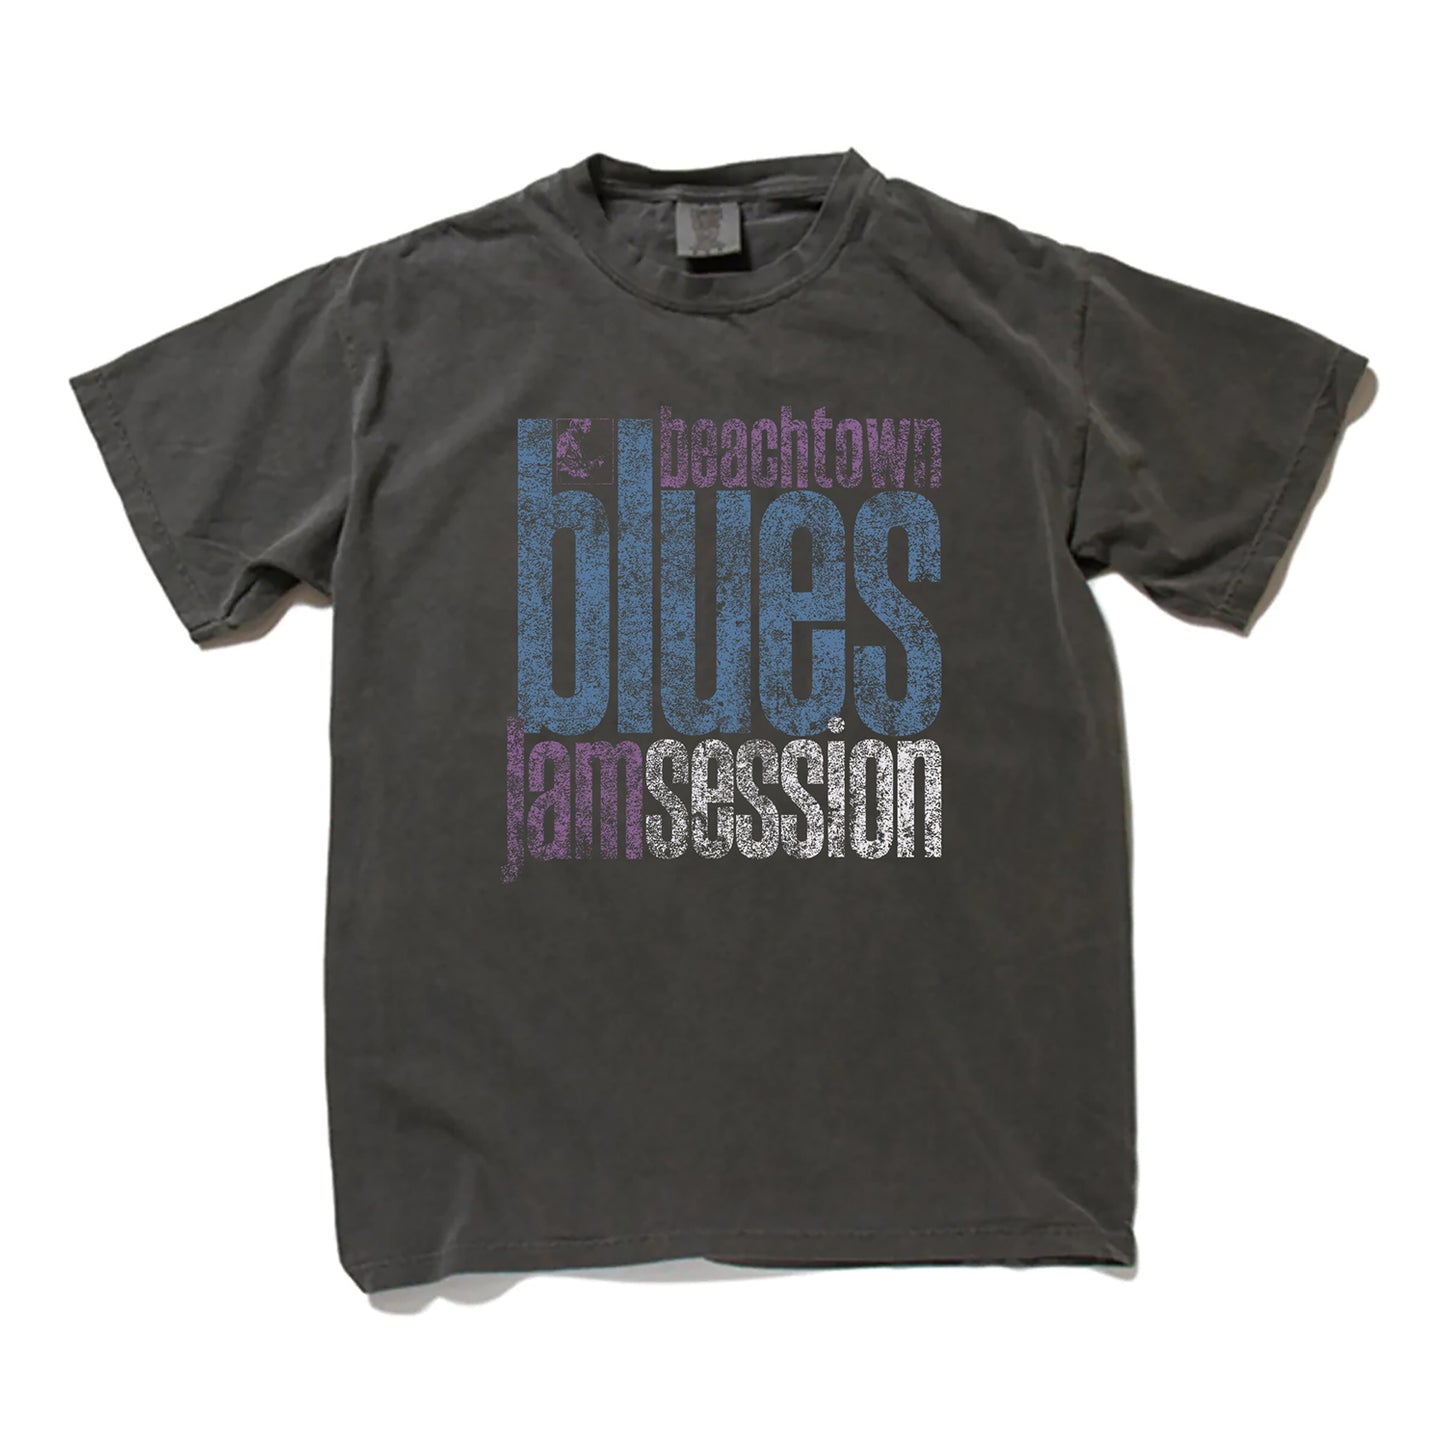 BEACHTOWN BLUES JAM SESSION S/S Tshirts - PEPPER